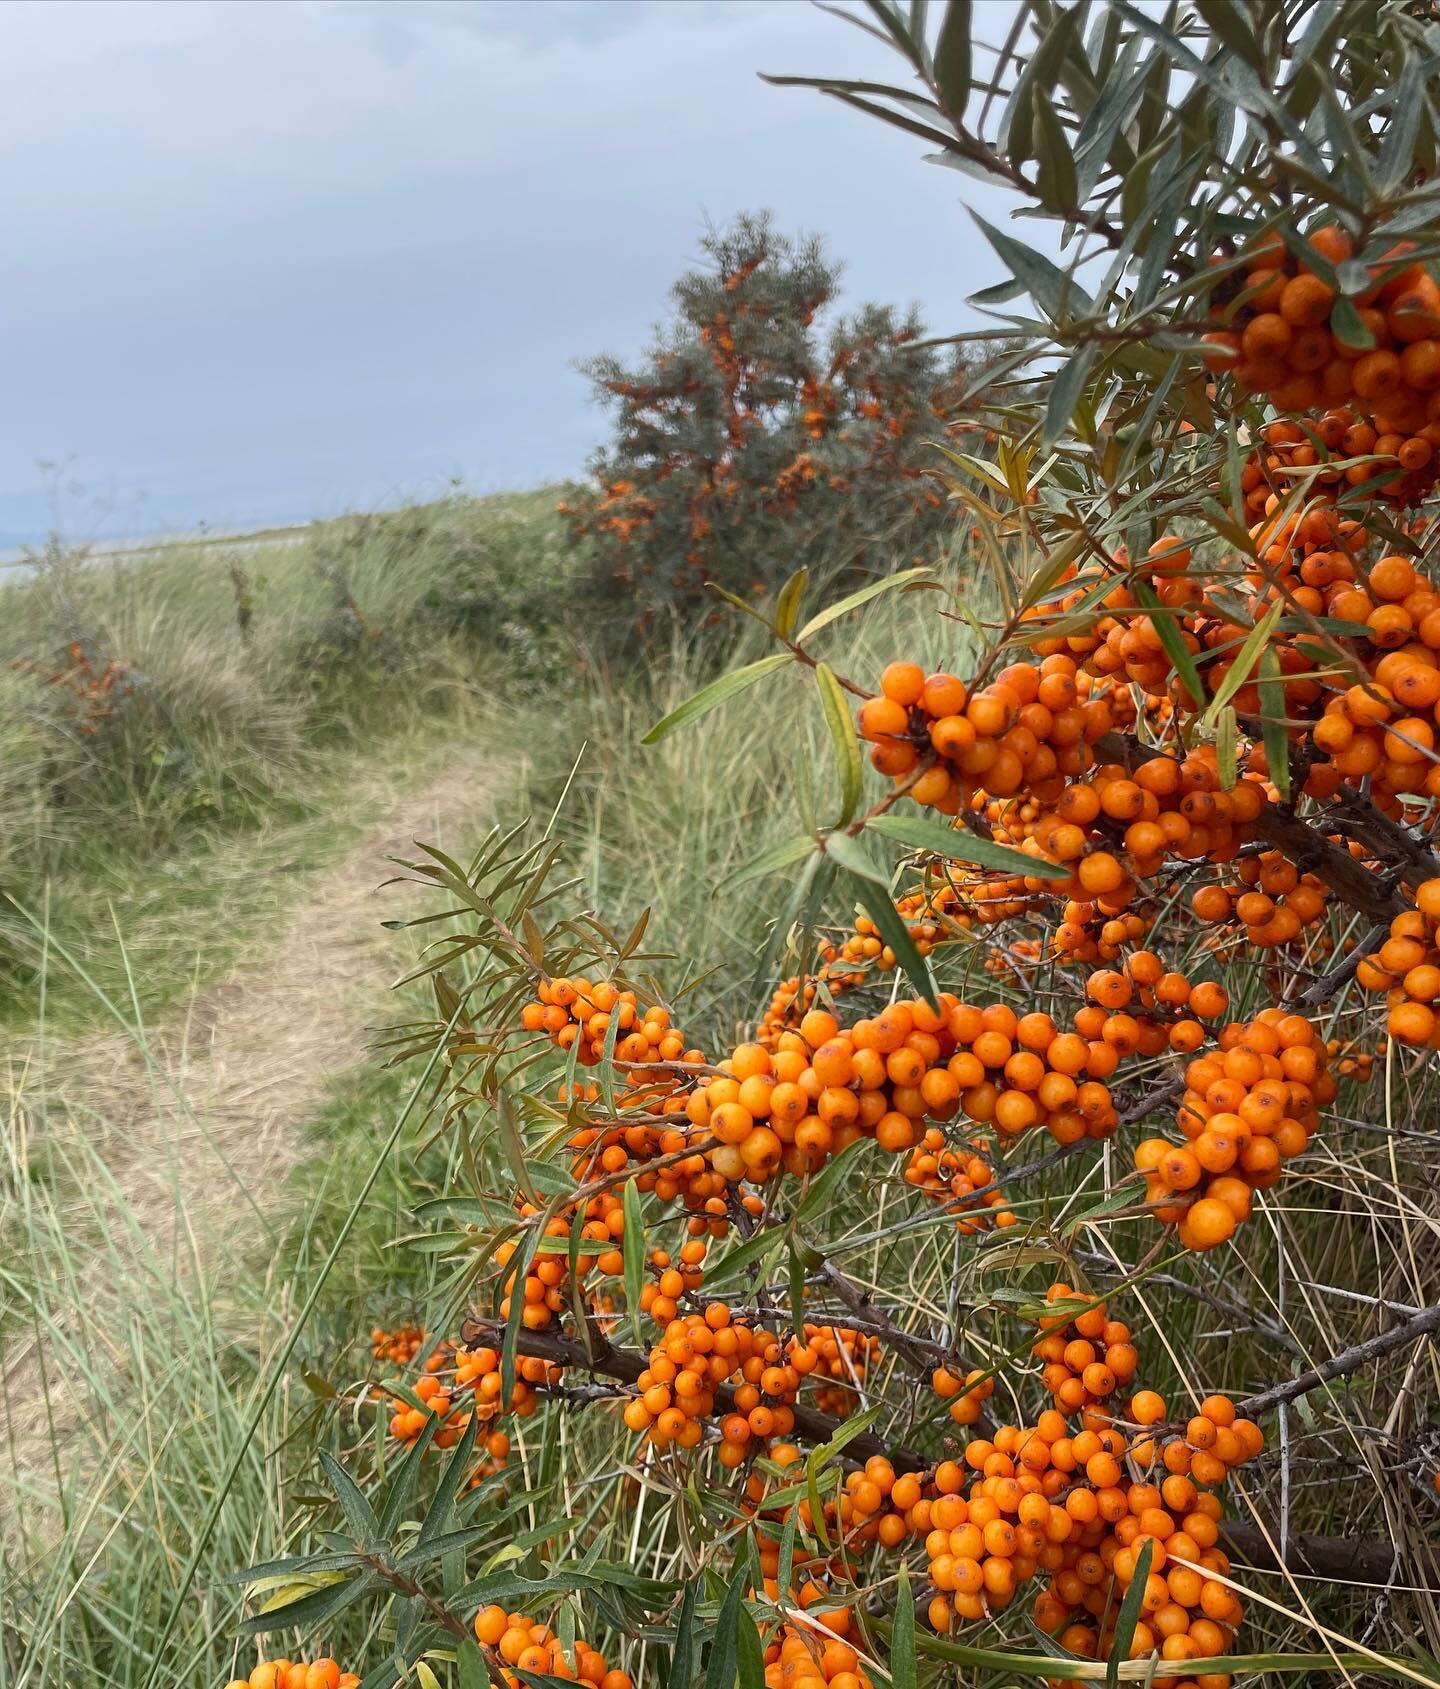 Day 57 on SlowCoast500 from Aberlady to North Berwick. My floral friends were the most delicious Sea Buckthorns. I pick the thorny branches en Ma&szlig;e with sharp secateurs, then freeze the lot. Once frozen, it&rsquo;s easy to pearl the berries off